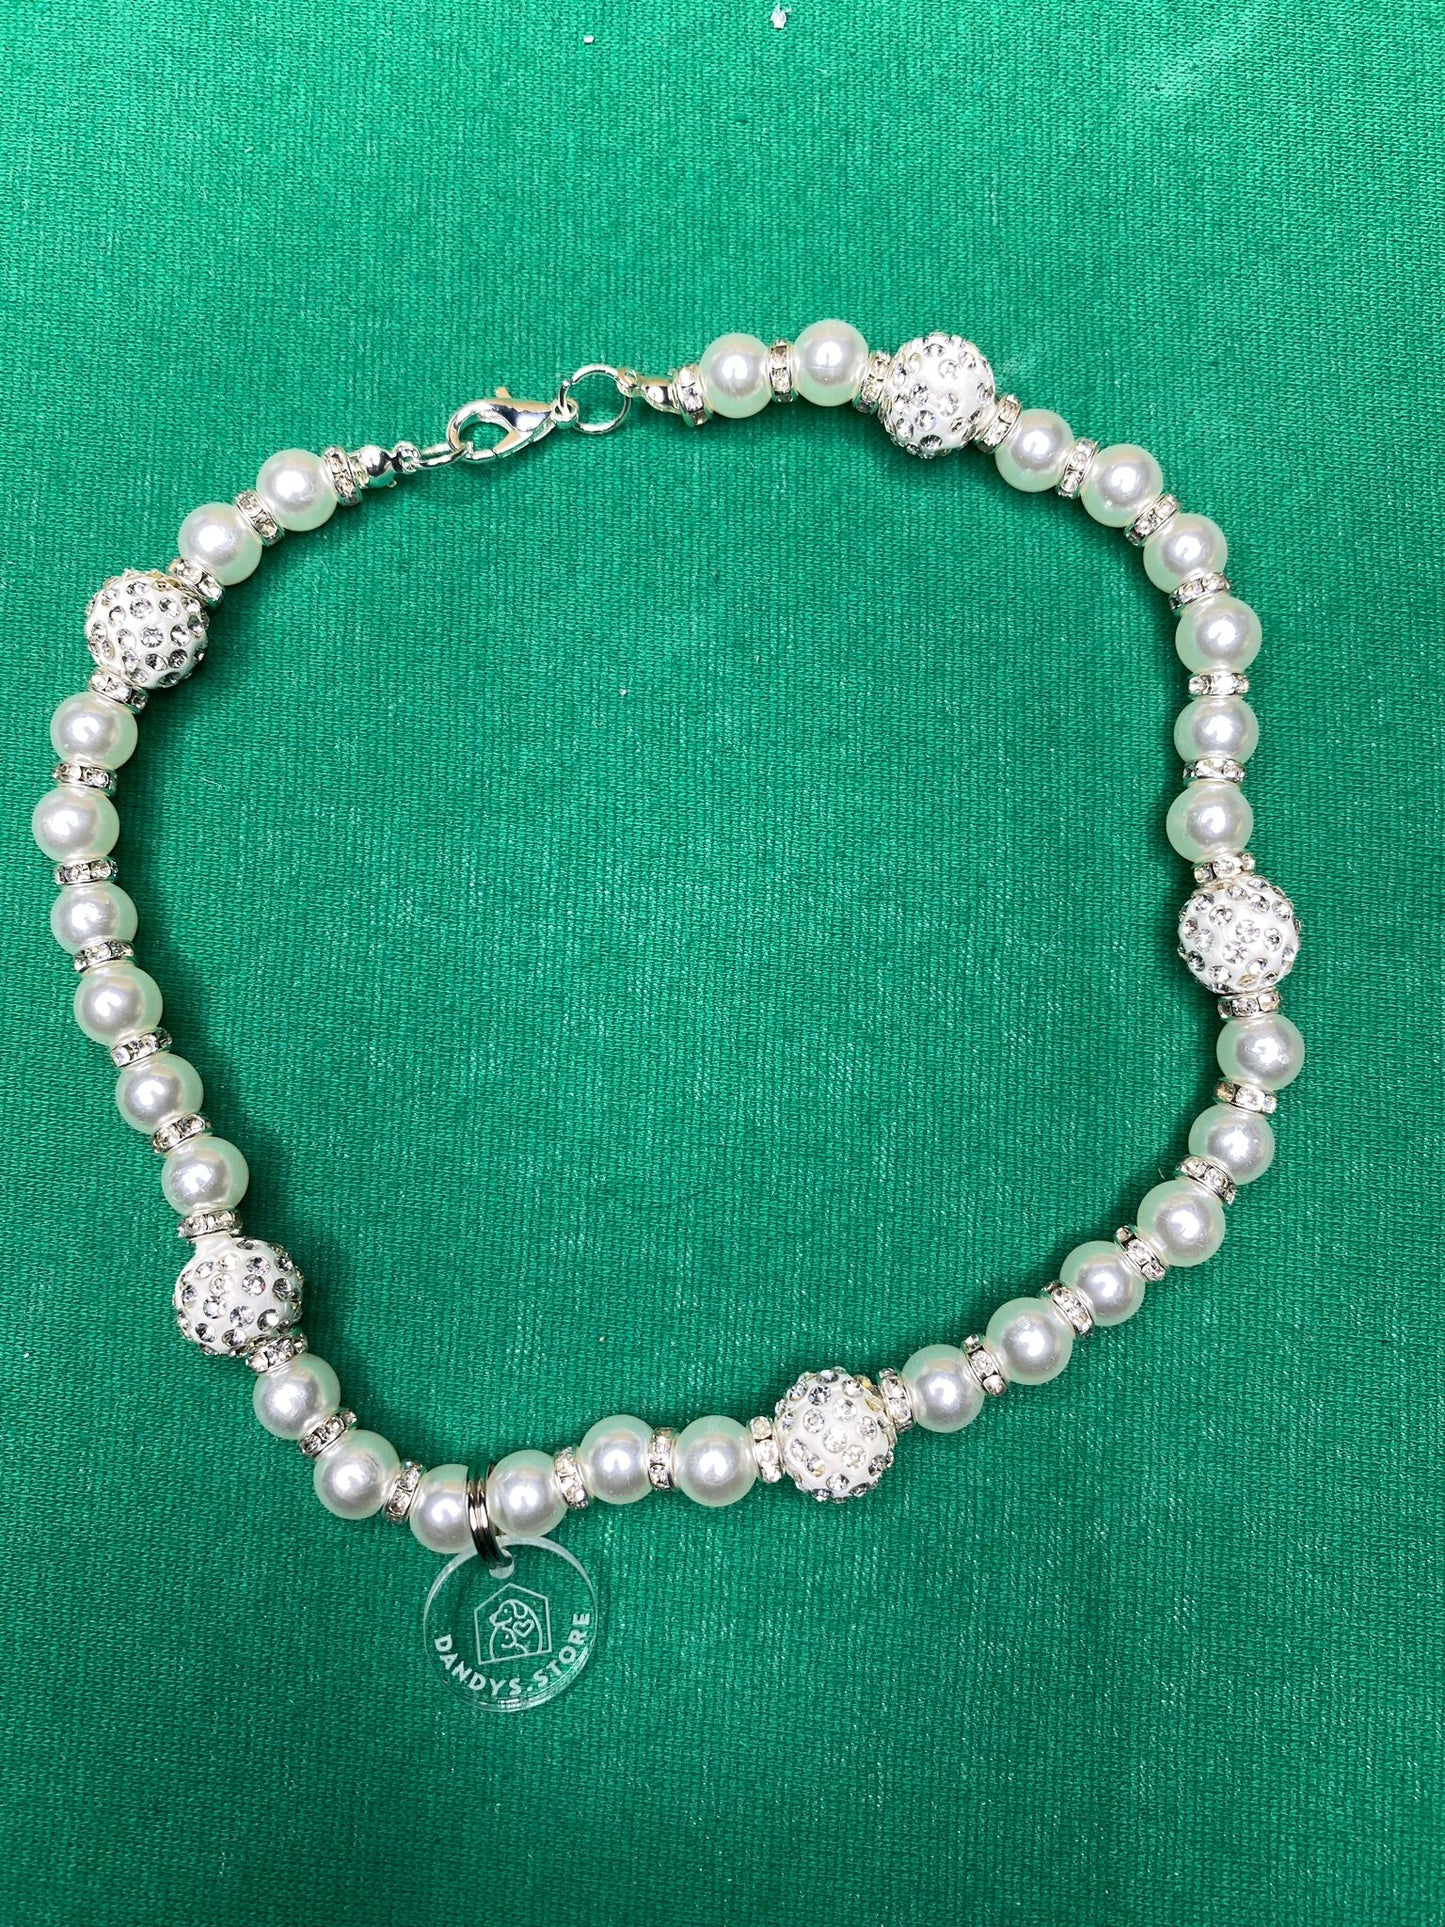 Pearl and crystal necklace for your Princess. Handmade with love.